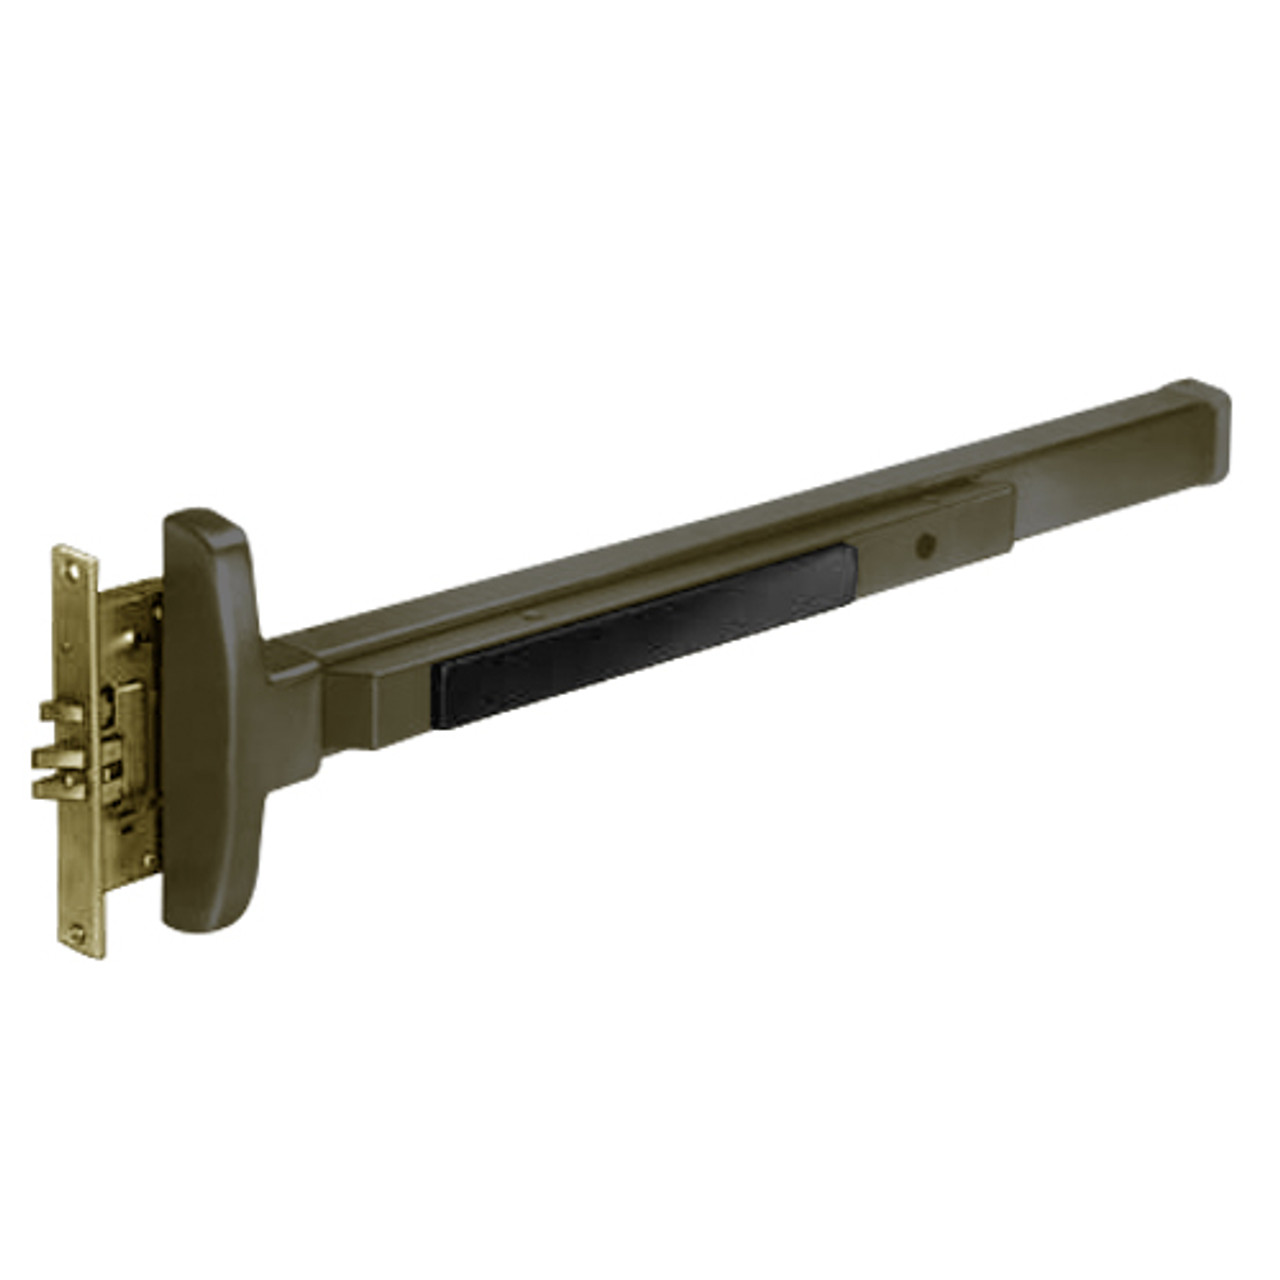 8310F-LHR-10B Sargent 80 Series Exit Only Narrow Stile Mortise Lock Exit Device in Oil Rubbed Bronze